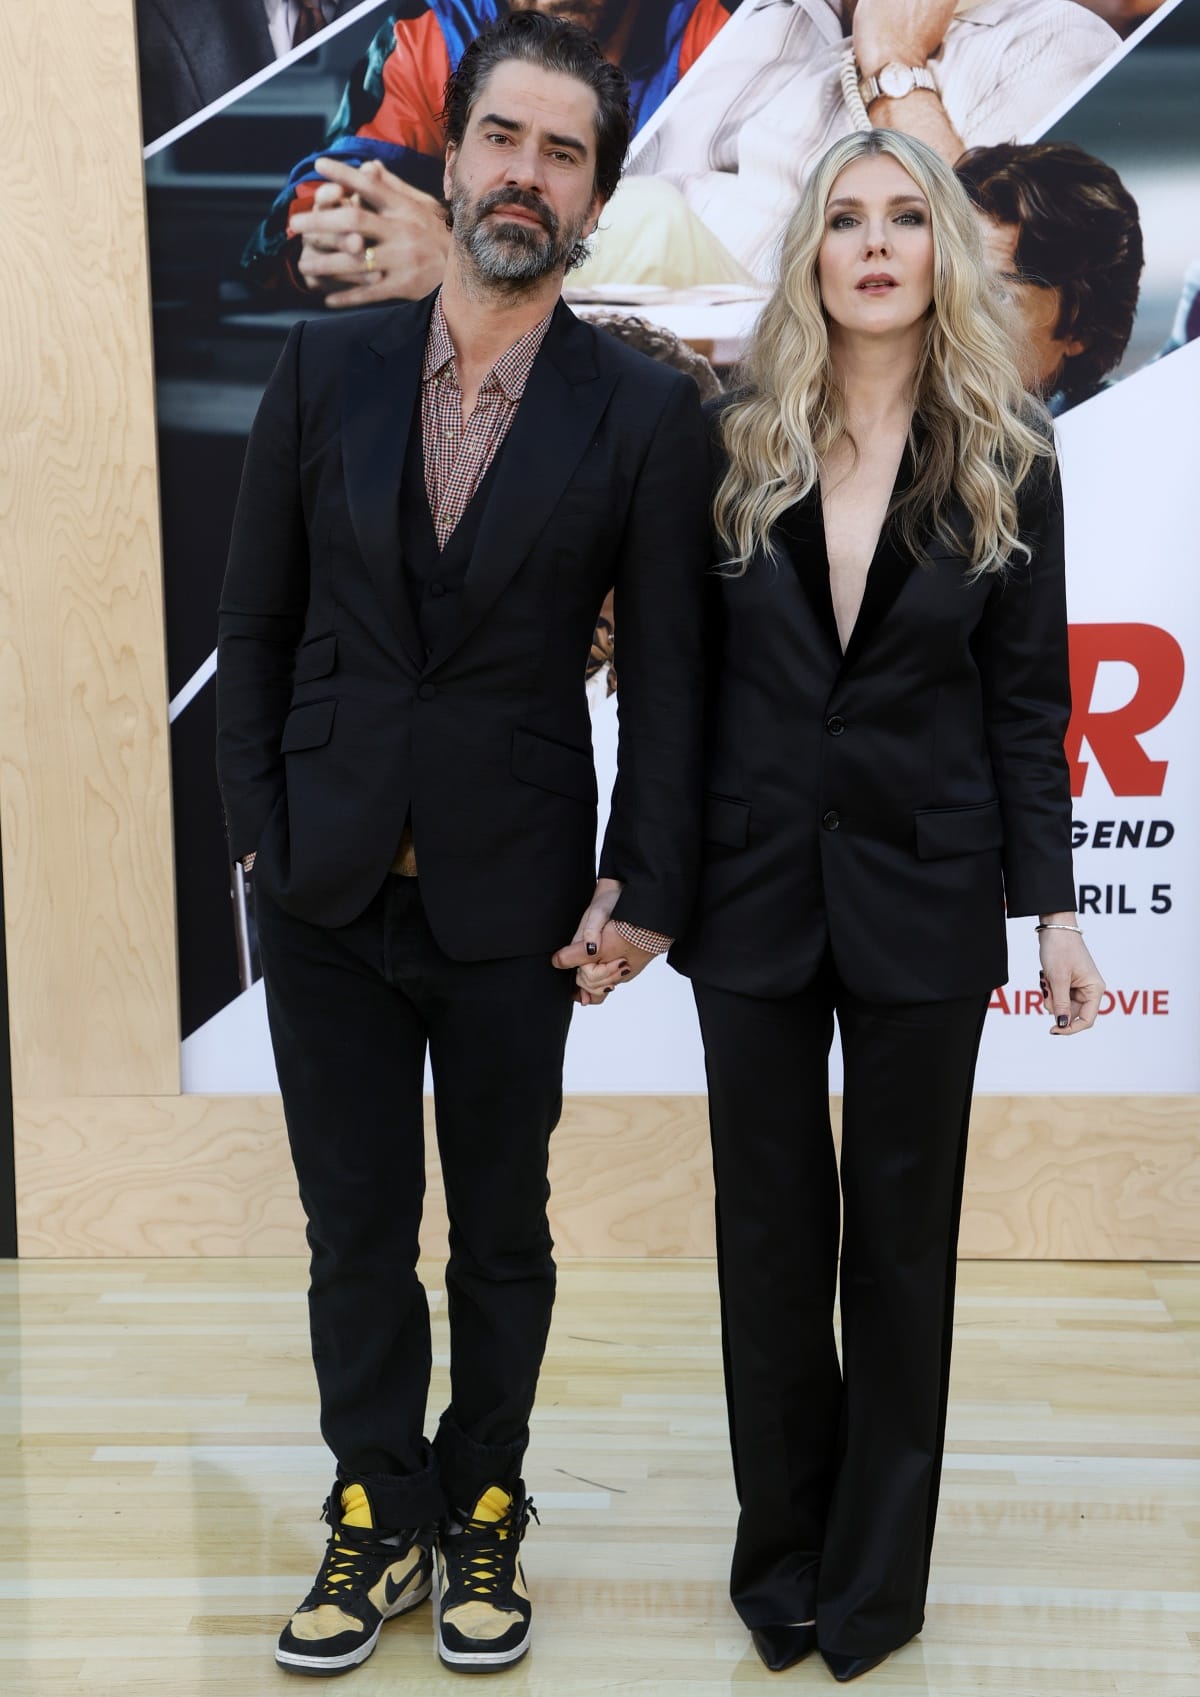 Hamish Linklater and Lily Rabe making a cool entrance in all-black ensembles at the premiere of AIR